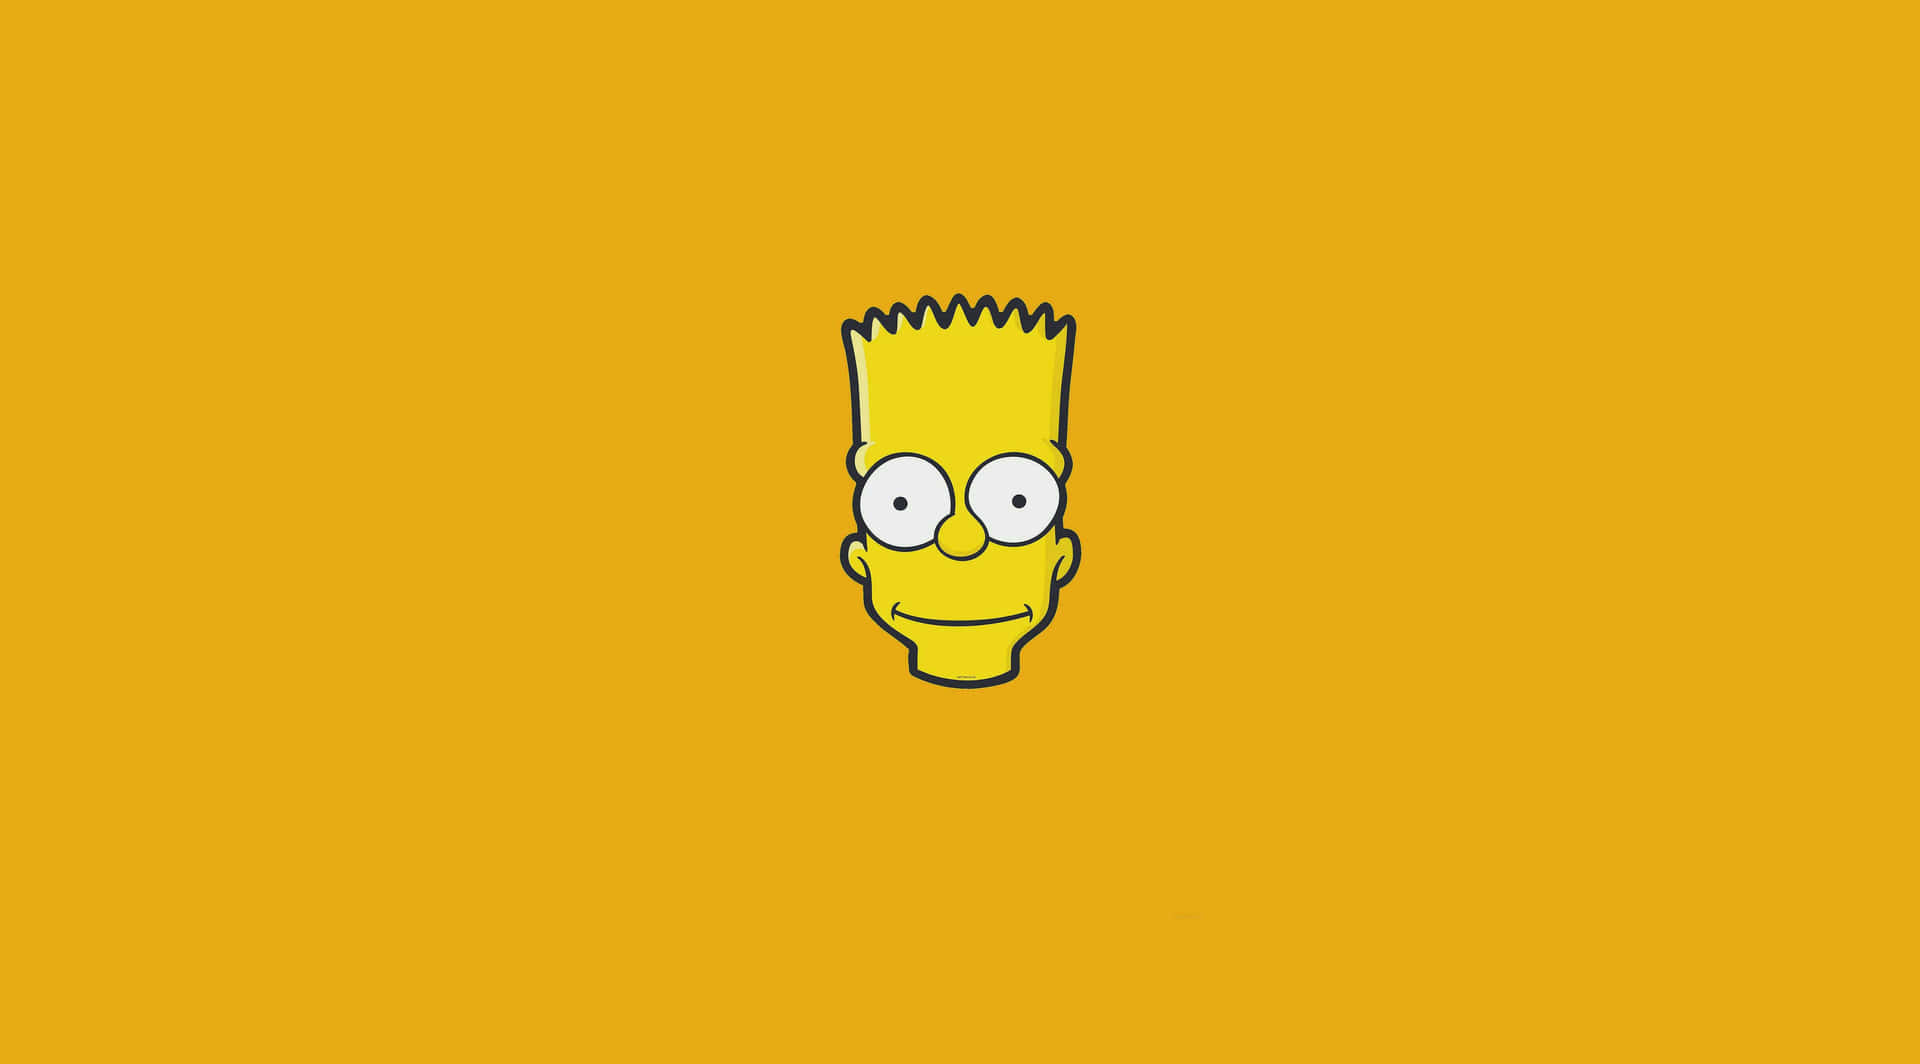 Get ready to play with the Simpsons Wallpaper